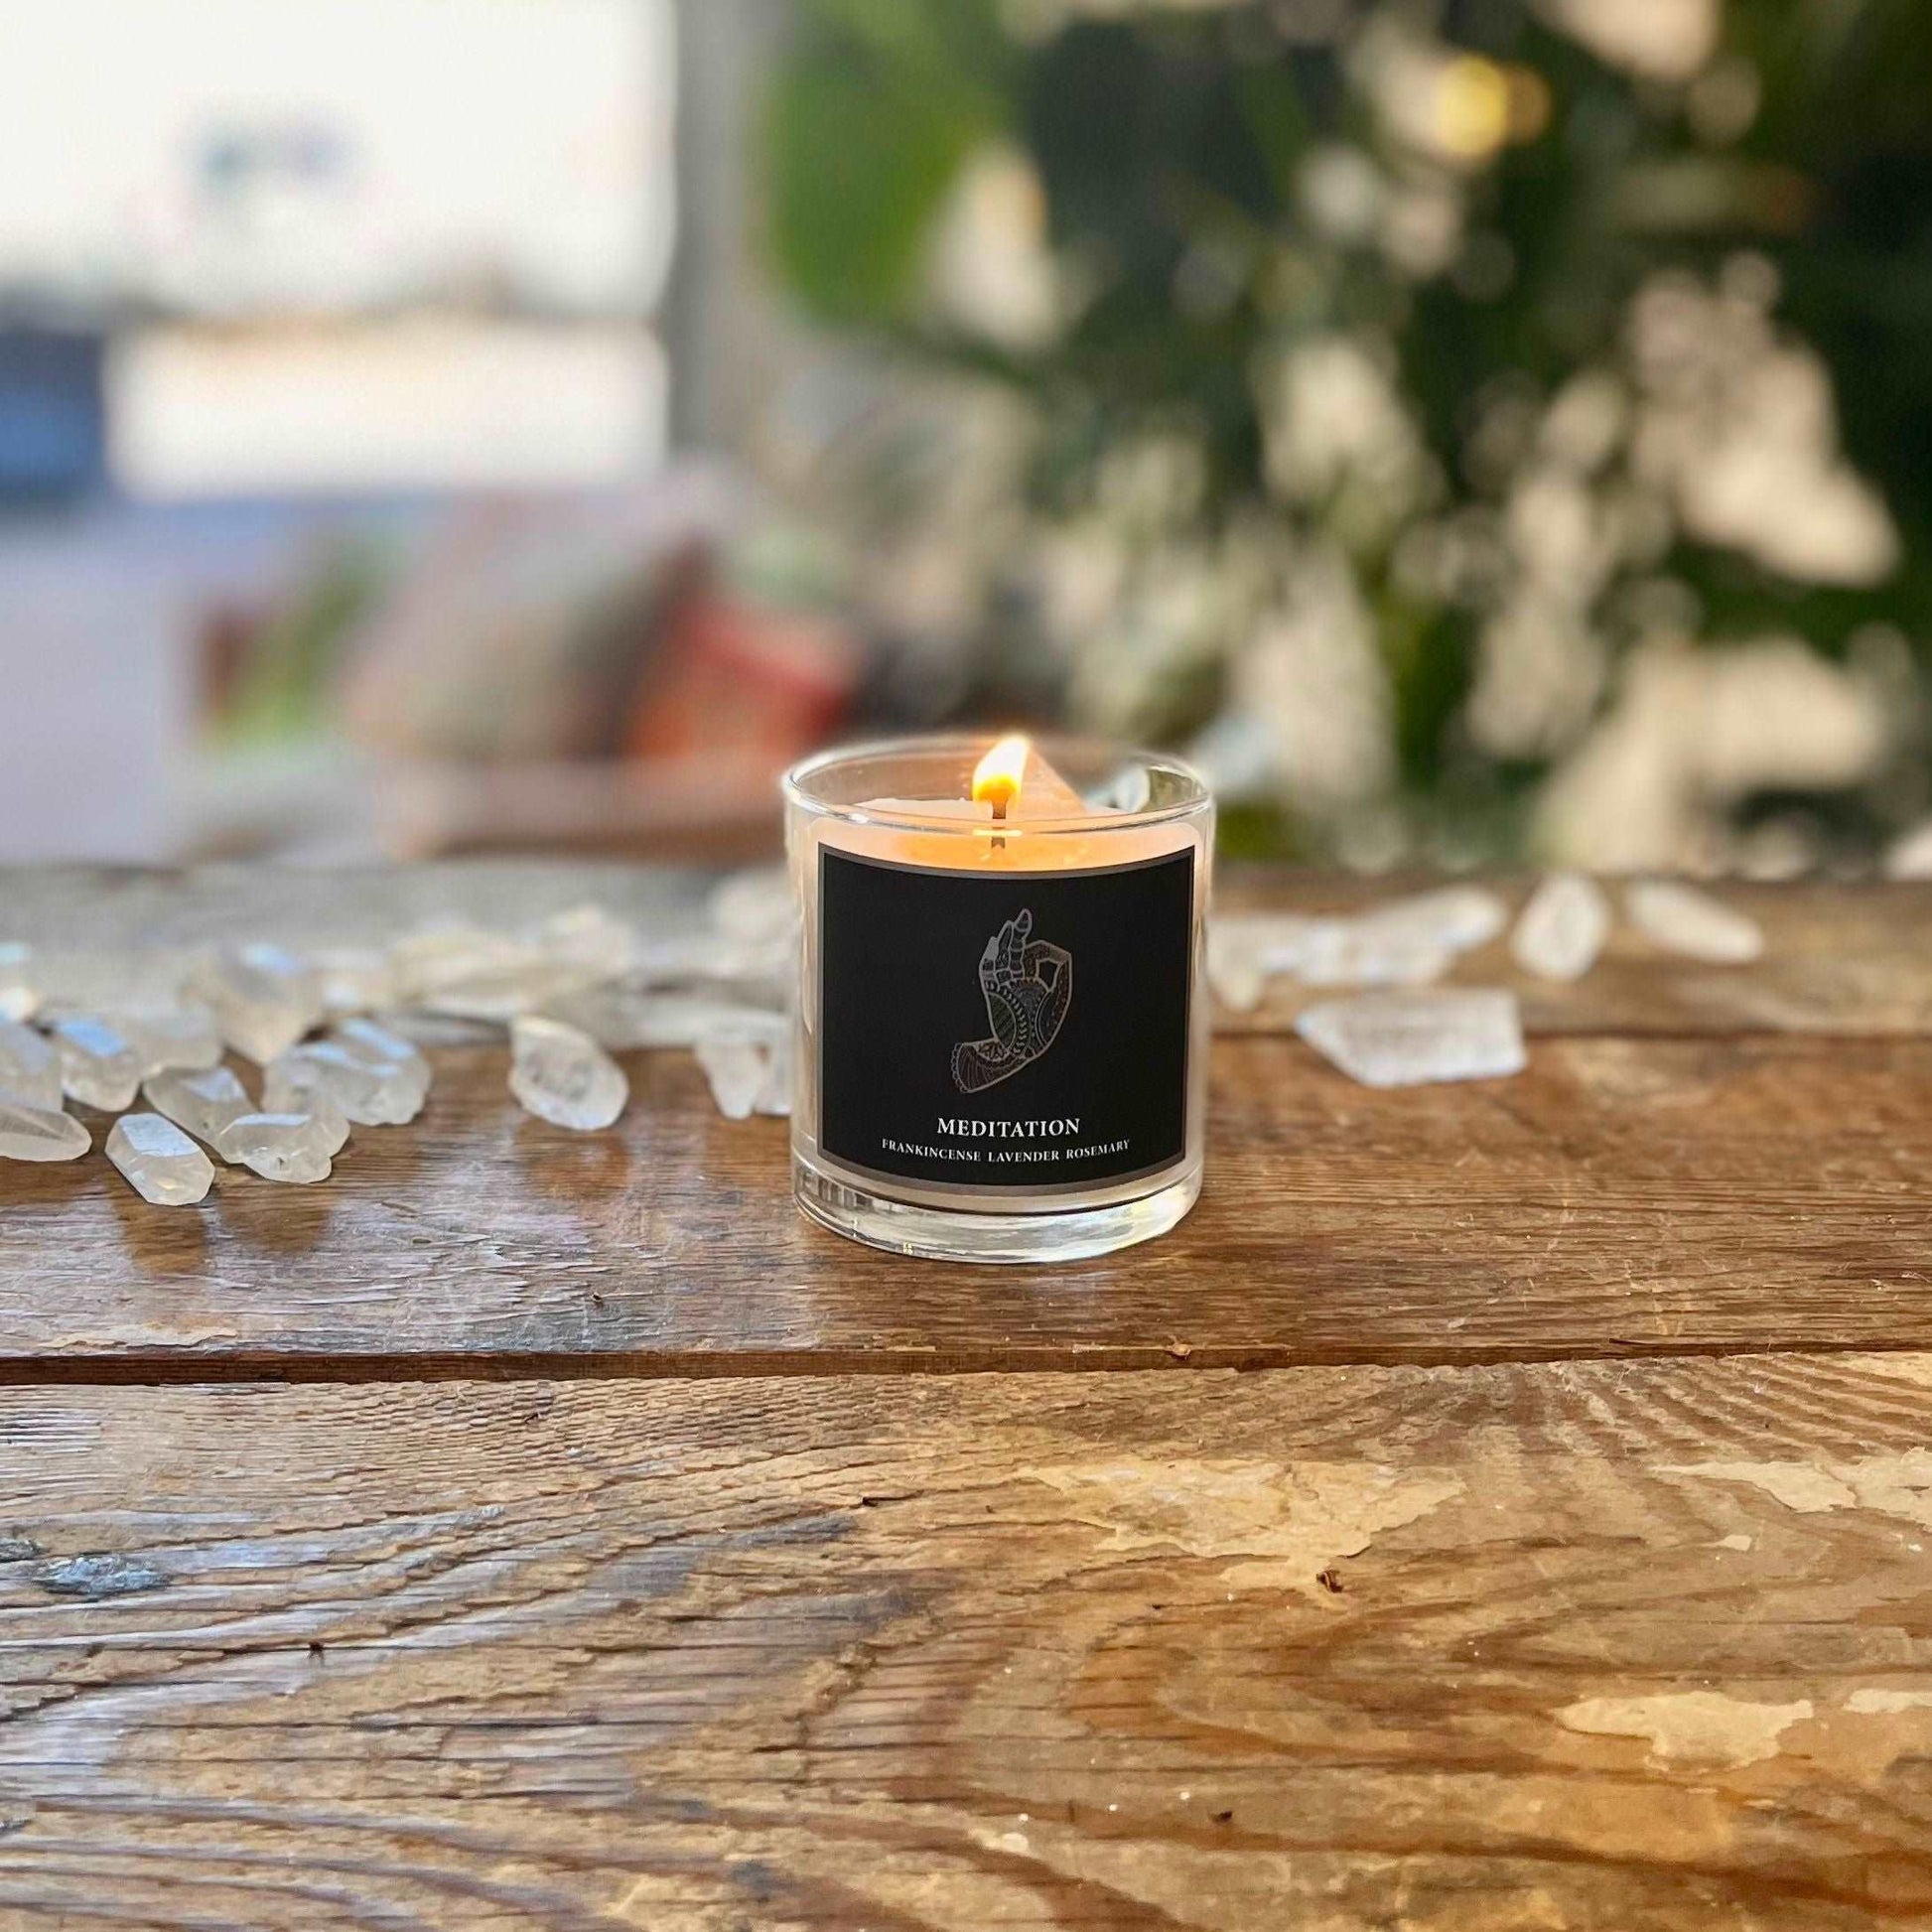 6 oz Natural GMM-Free Soy Wax Meditation Candle for Inner Peace, Tranquility, and Mindful Relaxation with Organic Frankincense, Lavender, and Rosemary Essential Oils and Clear Quartz Crystal